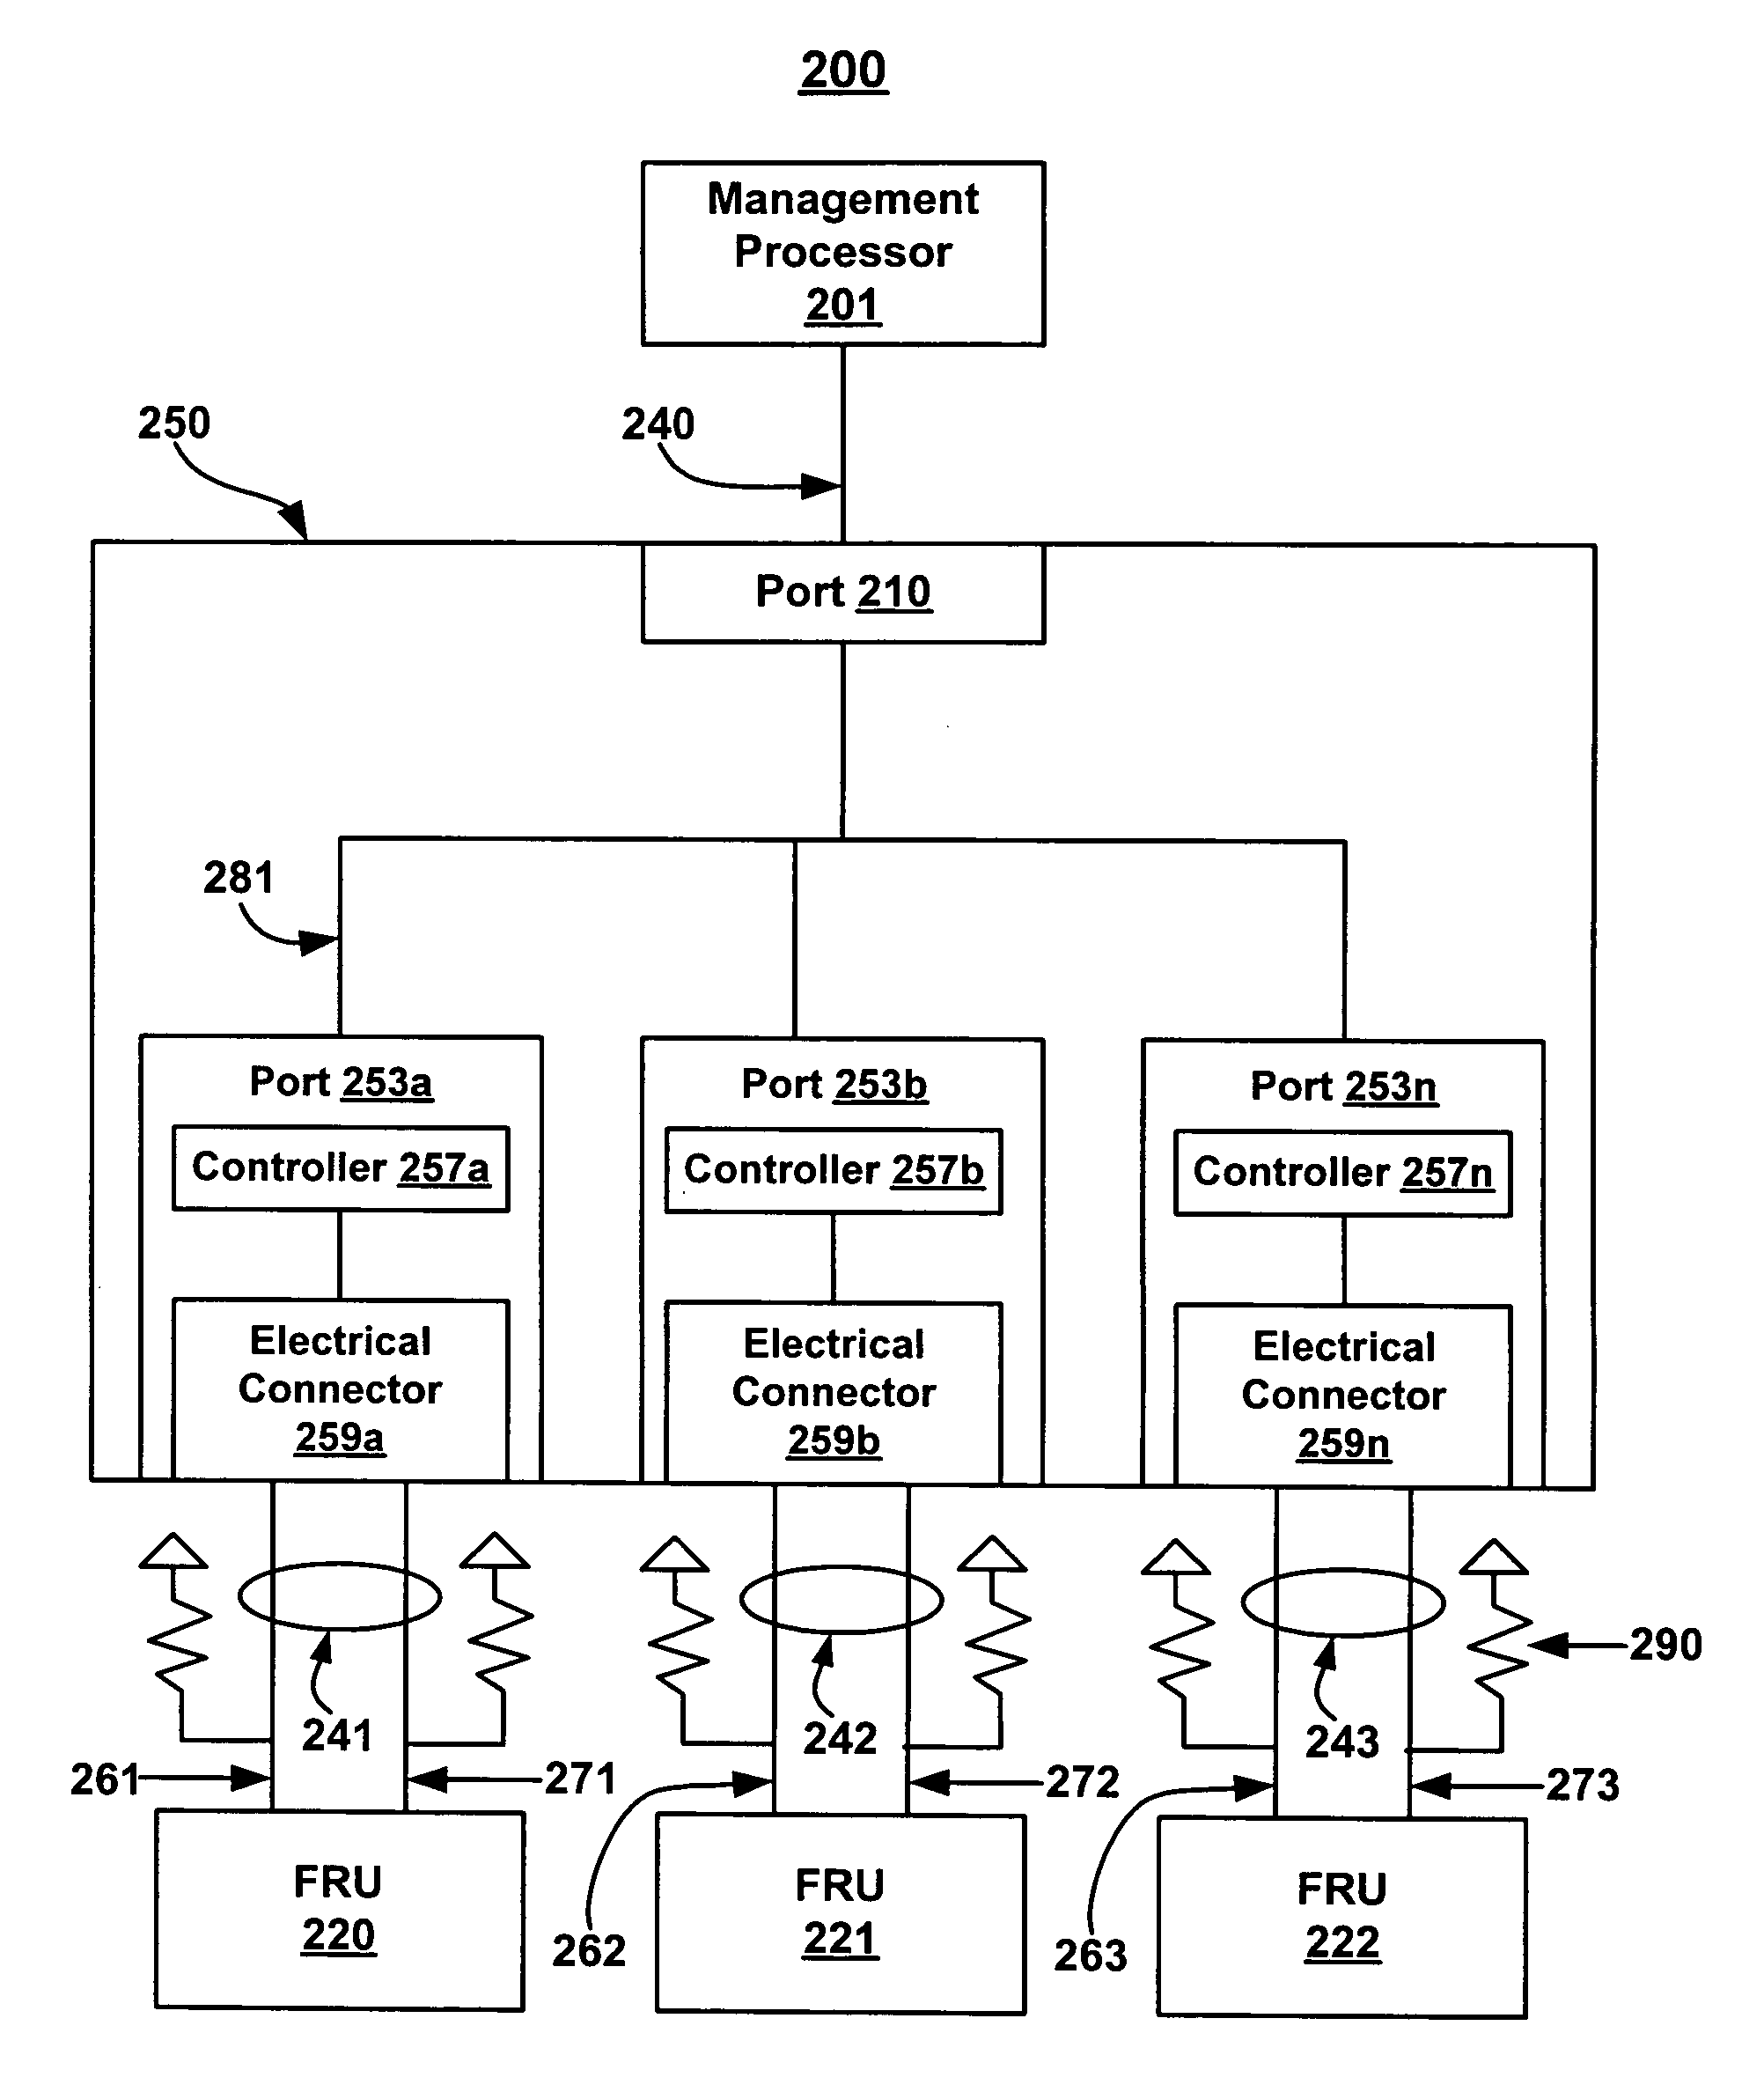 Inter integrated circuit bus router for preventing communication to an unauthorized port